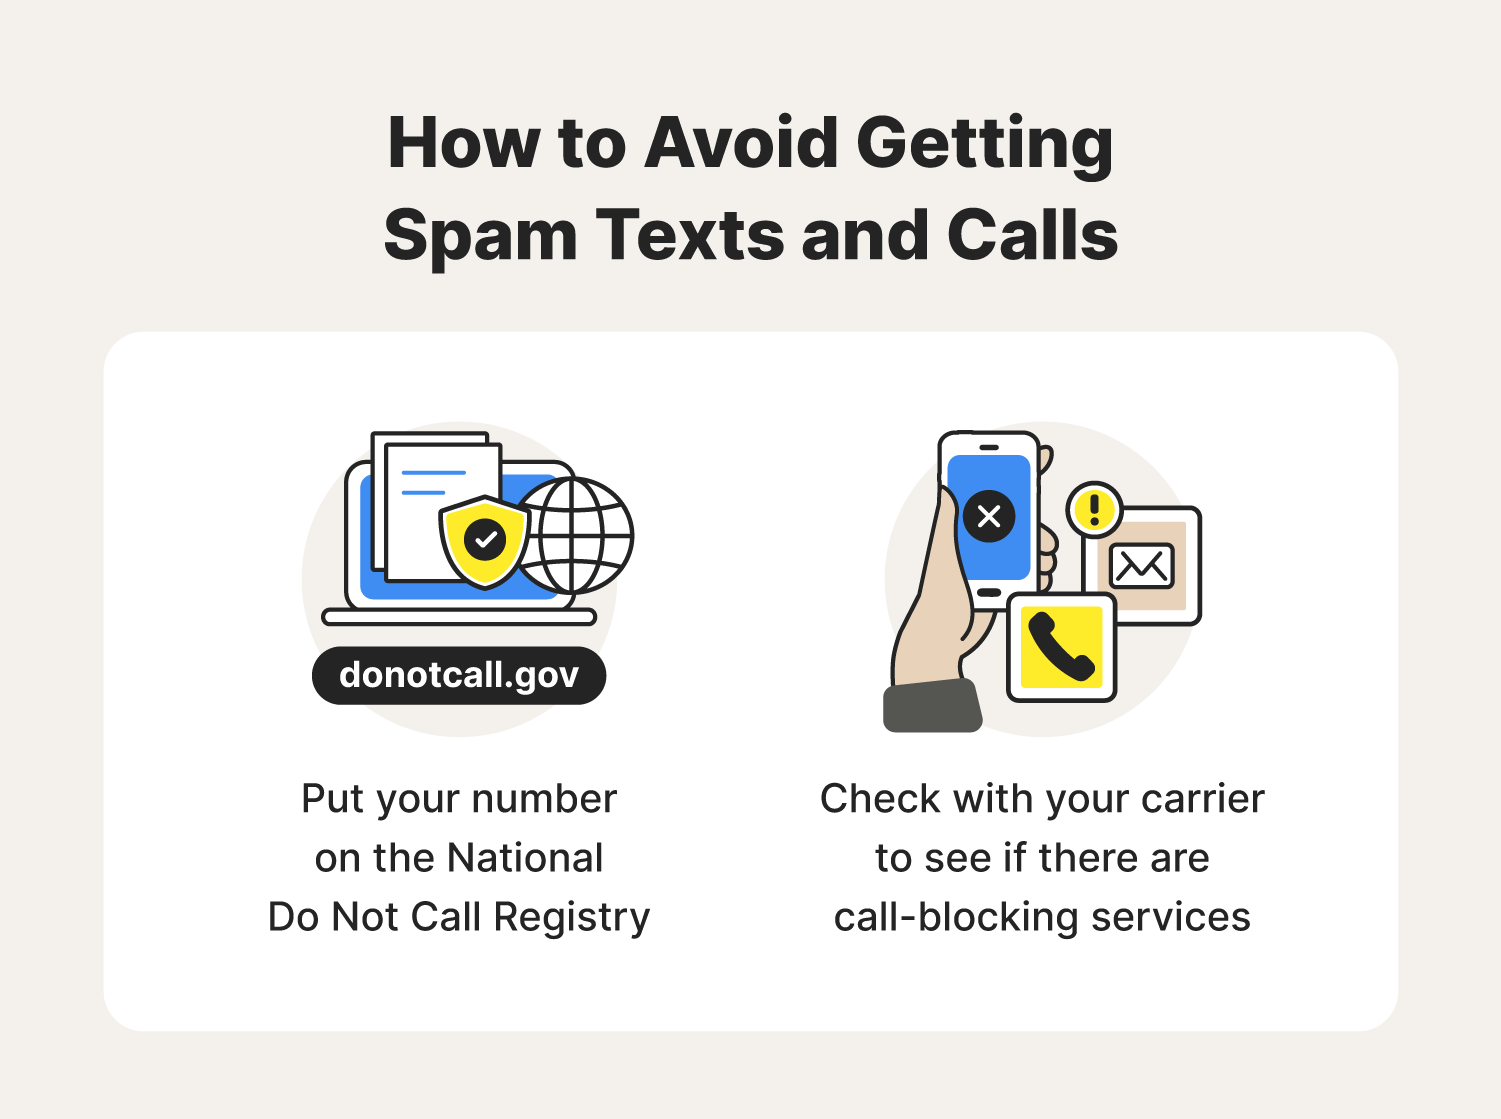 A graphic details how to stop spam texts by registering for the National Do Not Call Registry and utilizing call-blocking services.